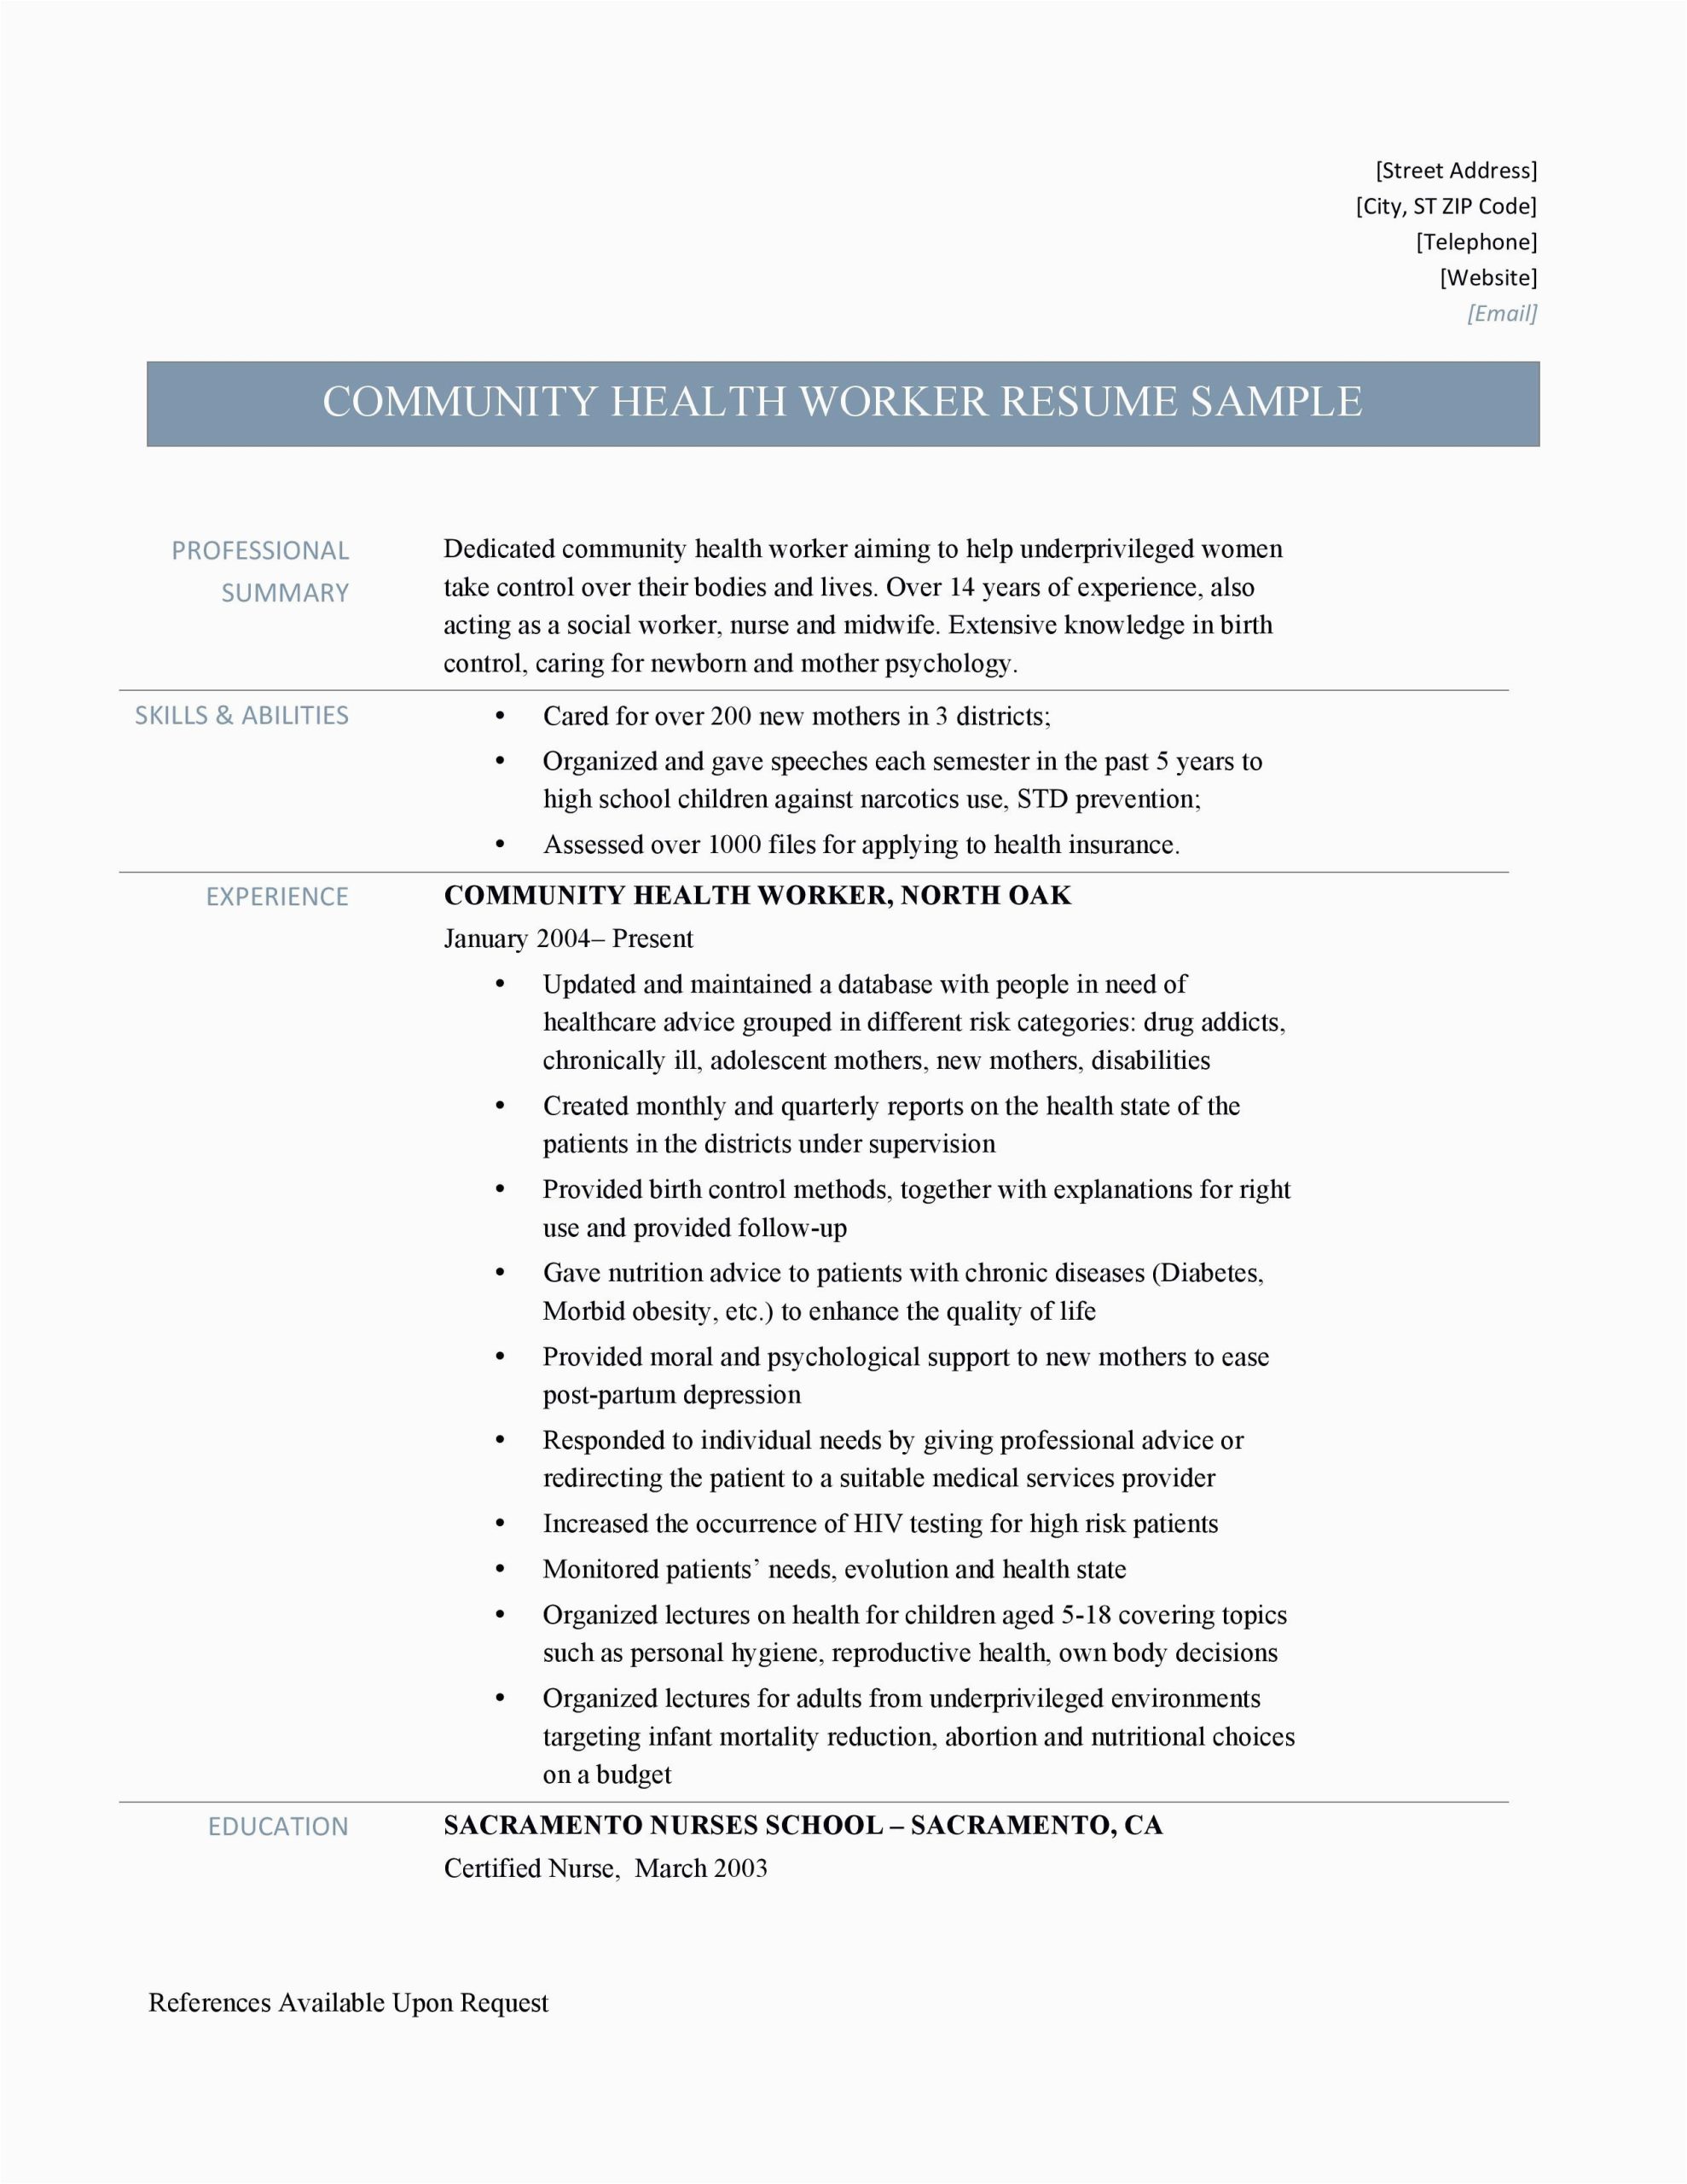 Sample Of Resume for Community Worker Munity Health Worker Resume Samples Tips and Templates